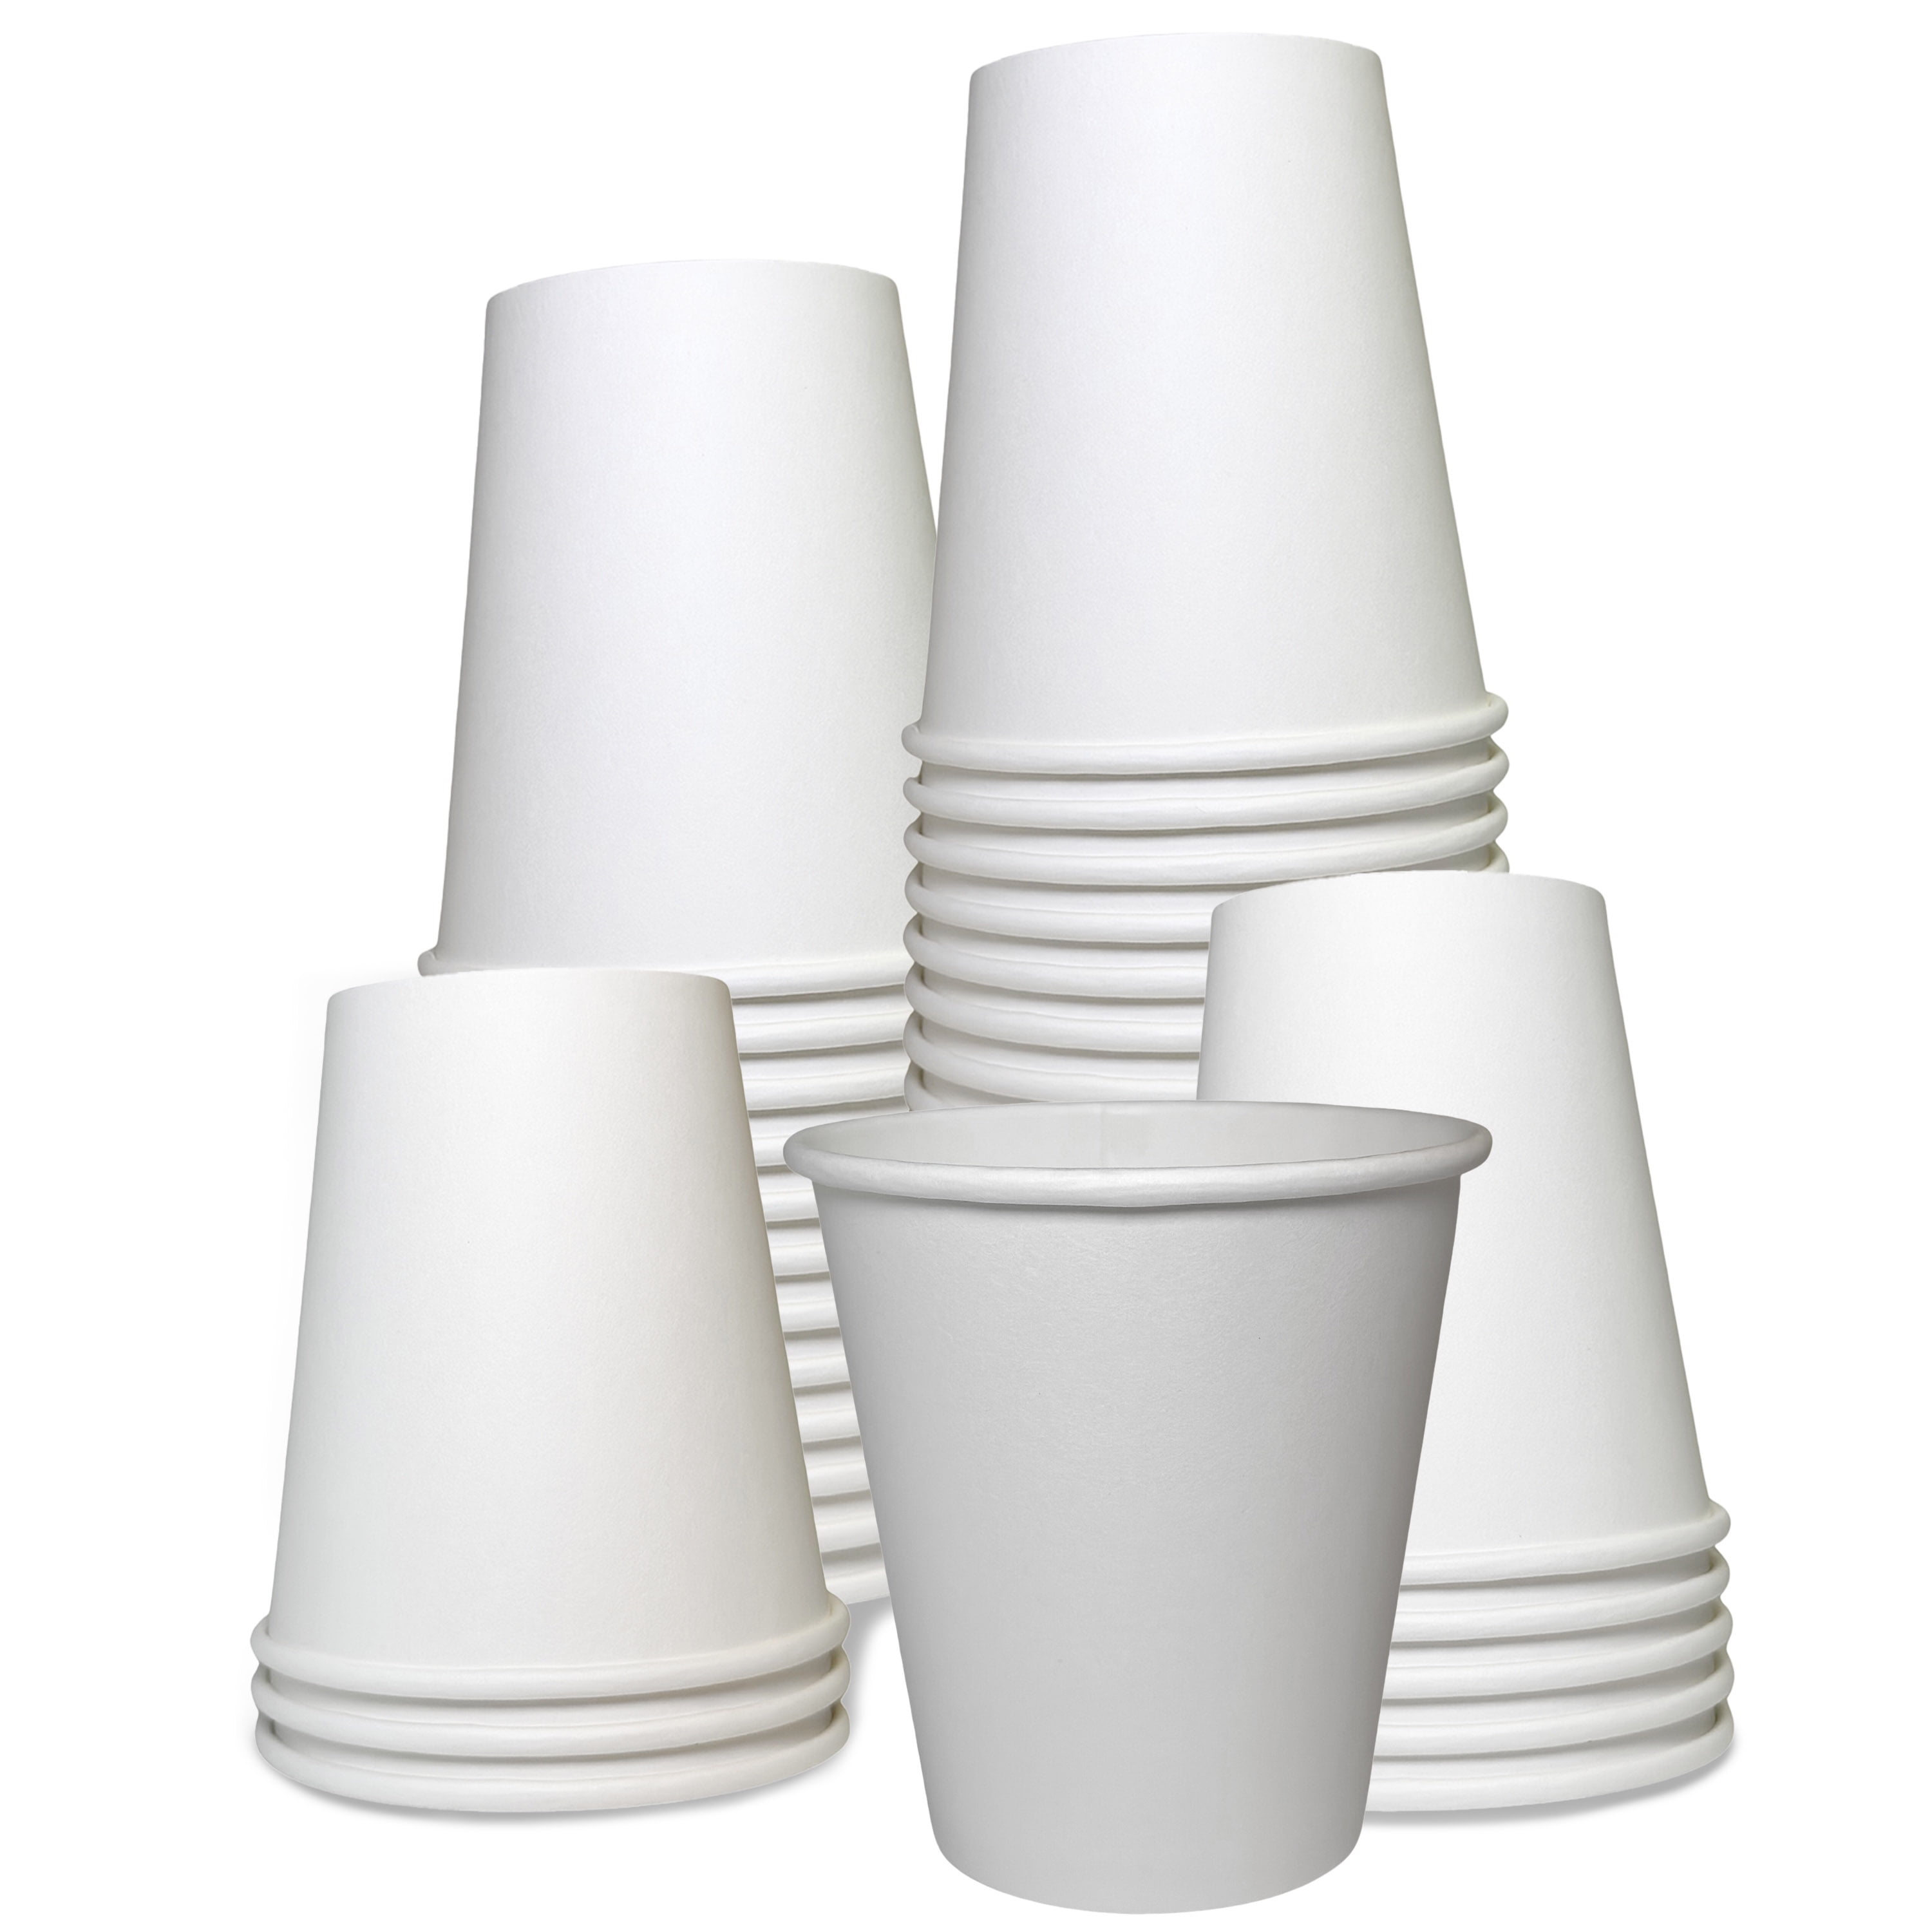 Disposable Coffee Cups - 240 Pcs Plastic Tea Cups - 2 oz Hard Plastic White  Coffee Mugs - Drinking T…See more Disposable Coffee Cups - 240 Pcs Plastic